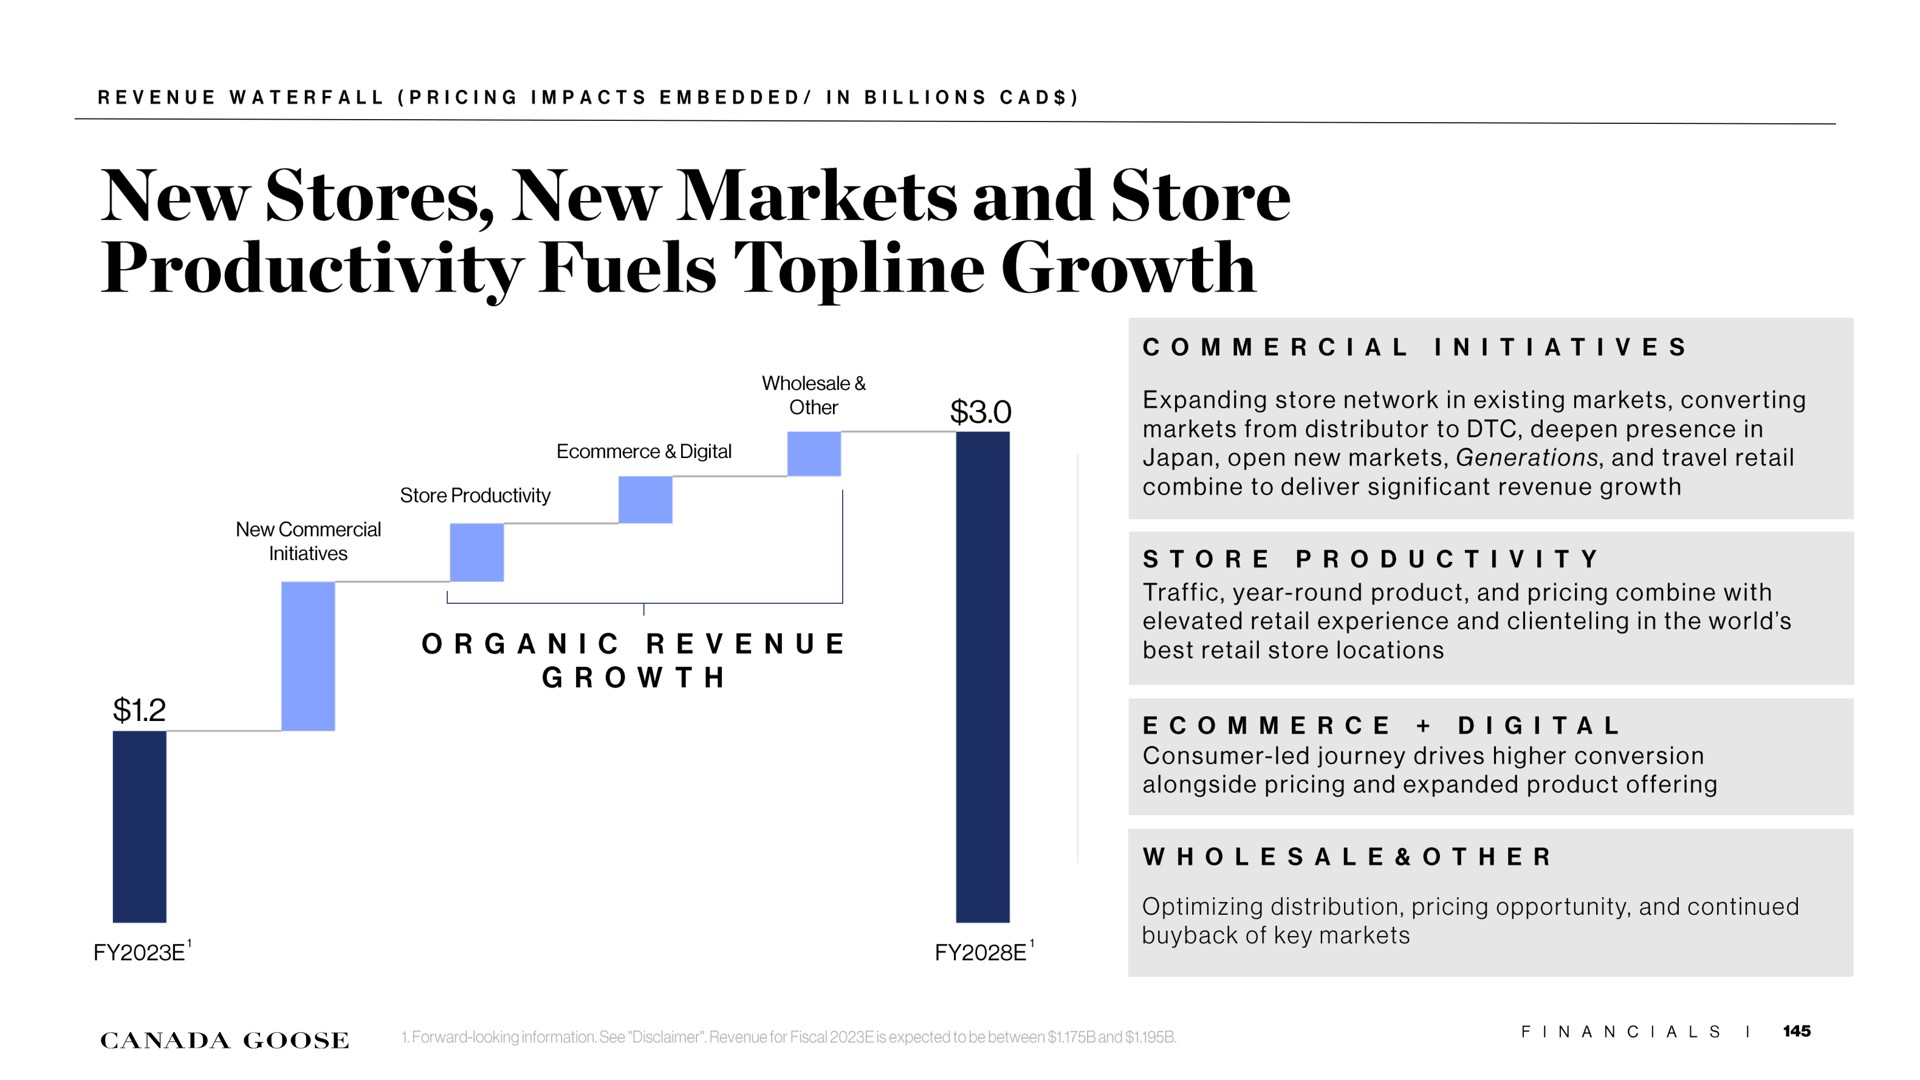 new stores new markets and store productivity fuels topline growth organic revenue growth commercial initiatives expanding store network in existing markets converting markets from distributor to deepen presence in japan open new markets generations and travel retail combine to deliver significant revenue growth store productivity traffic year round product and pricing combine with elevated retail experience and in the world best retail store locations digital consumer led journey drives higher conversion alongside pricing and expanded product offering wholesale other optimizing distribution pricing opportunity and continued of key markets | Canada Goose